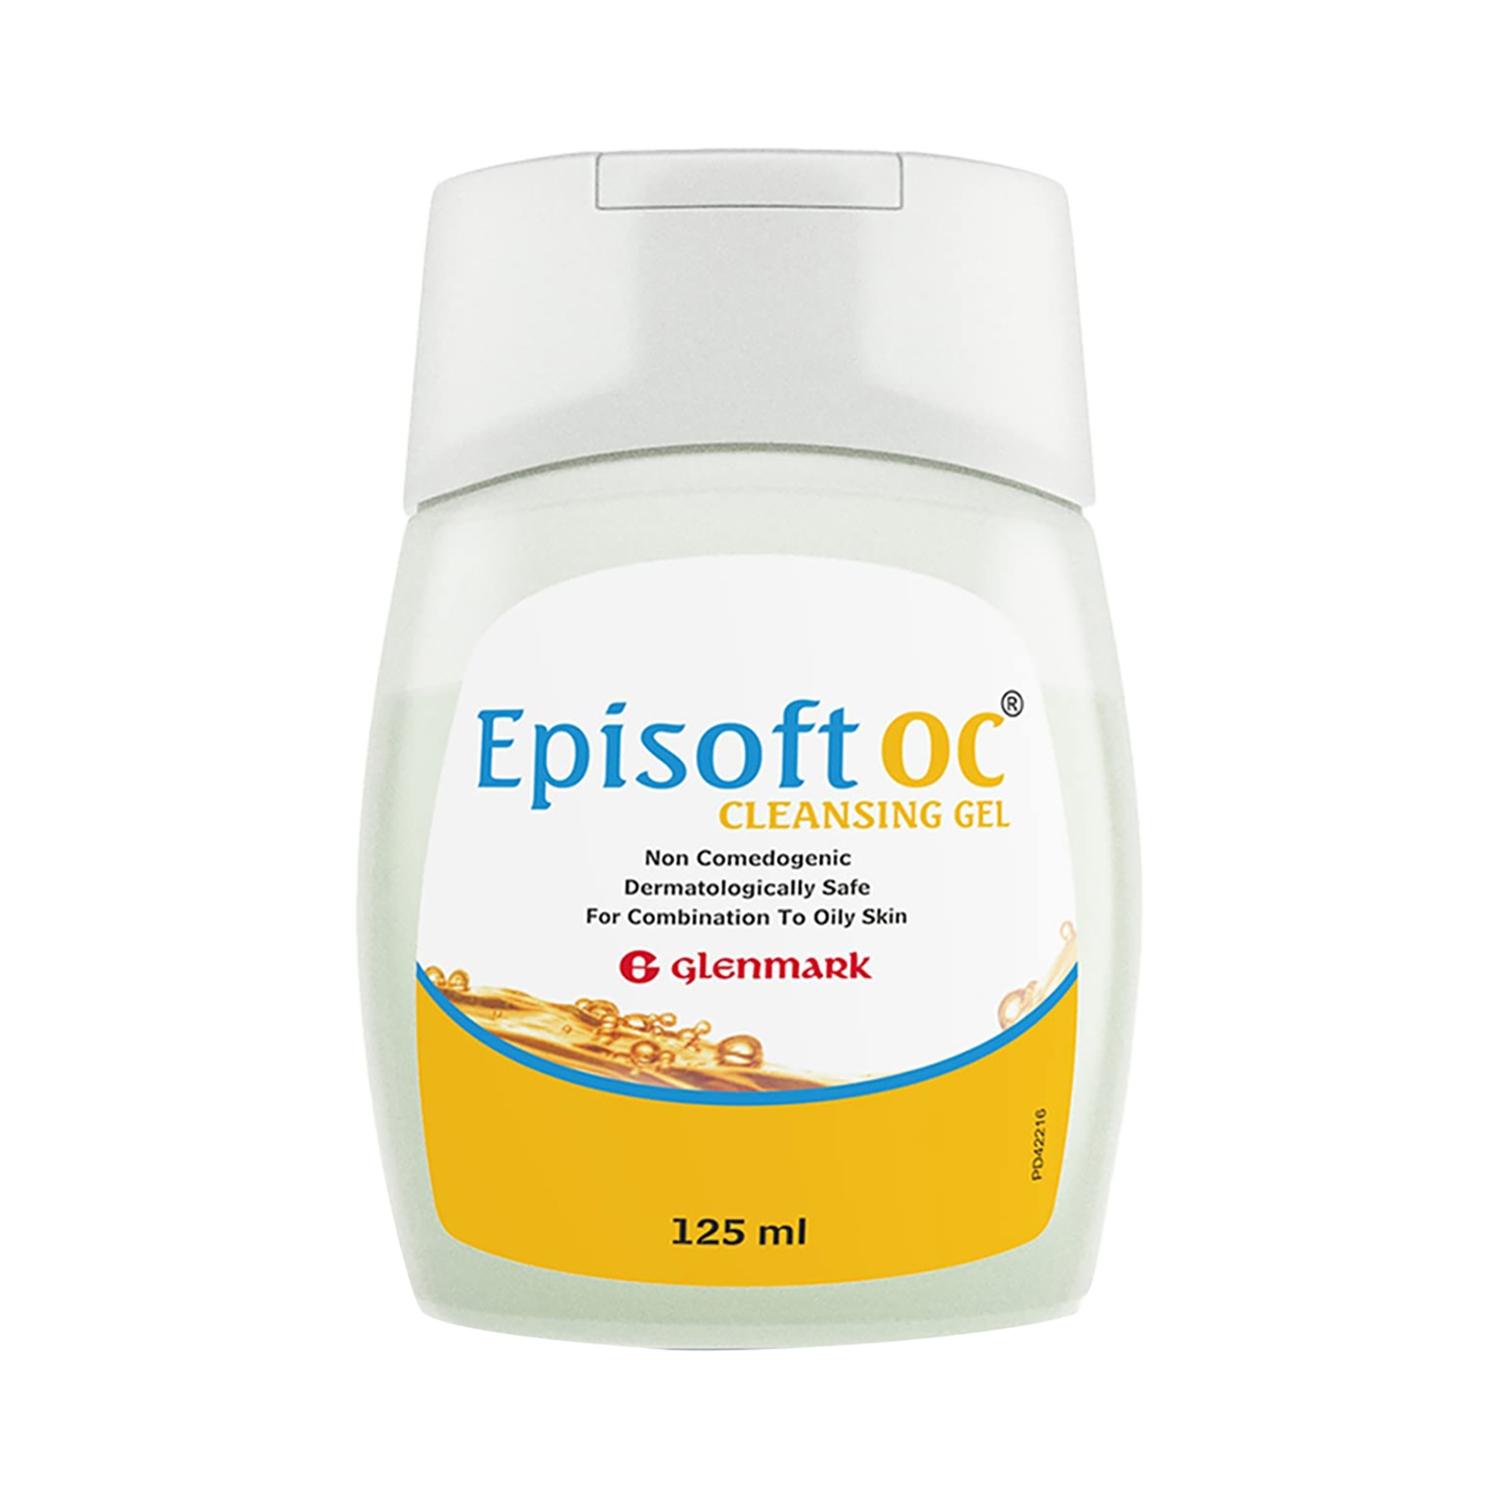 Episoft OC Cleansing Gel For Acne-Prone and Oily Skin (125ml)